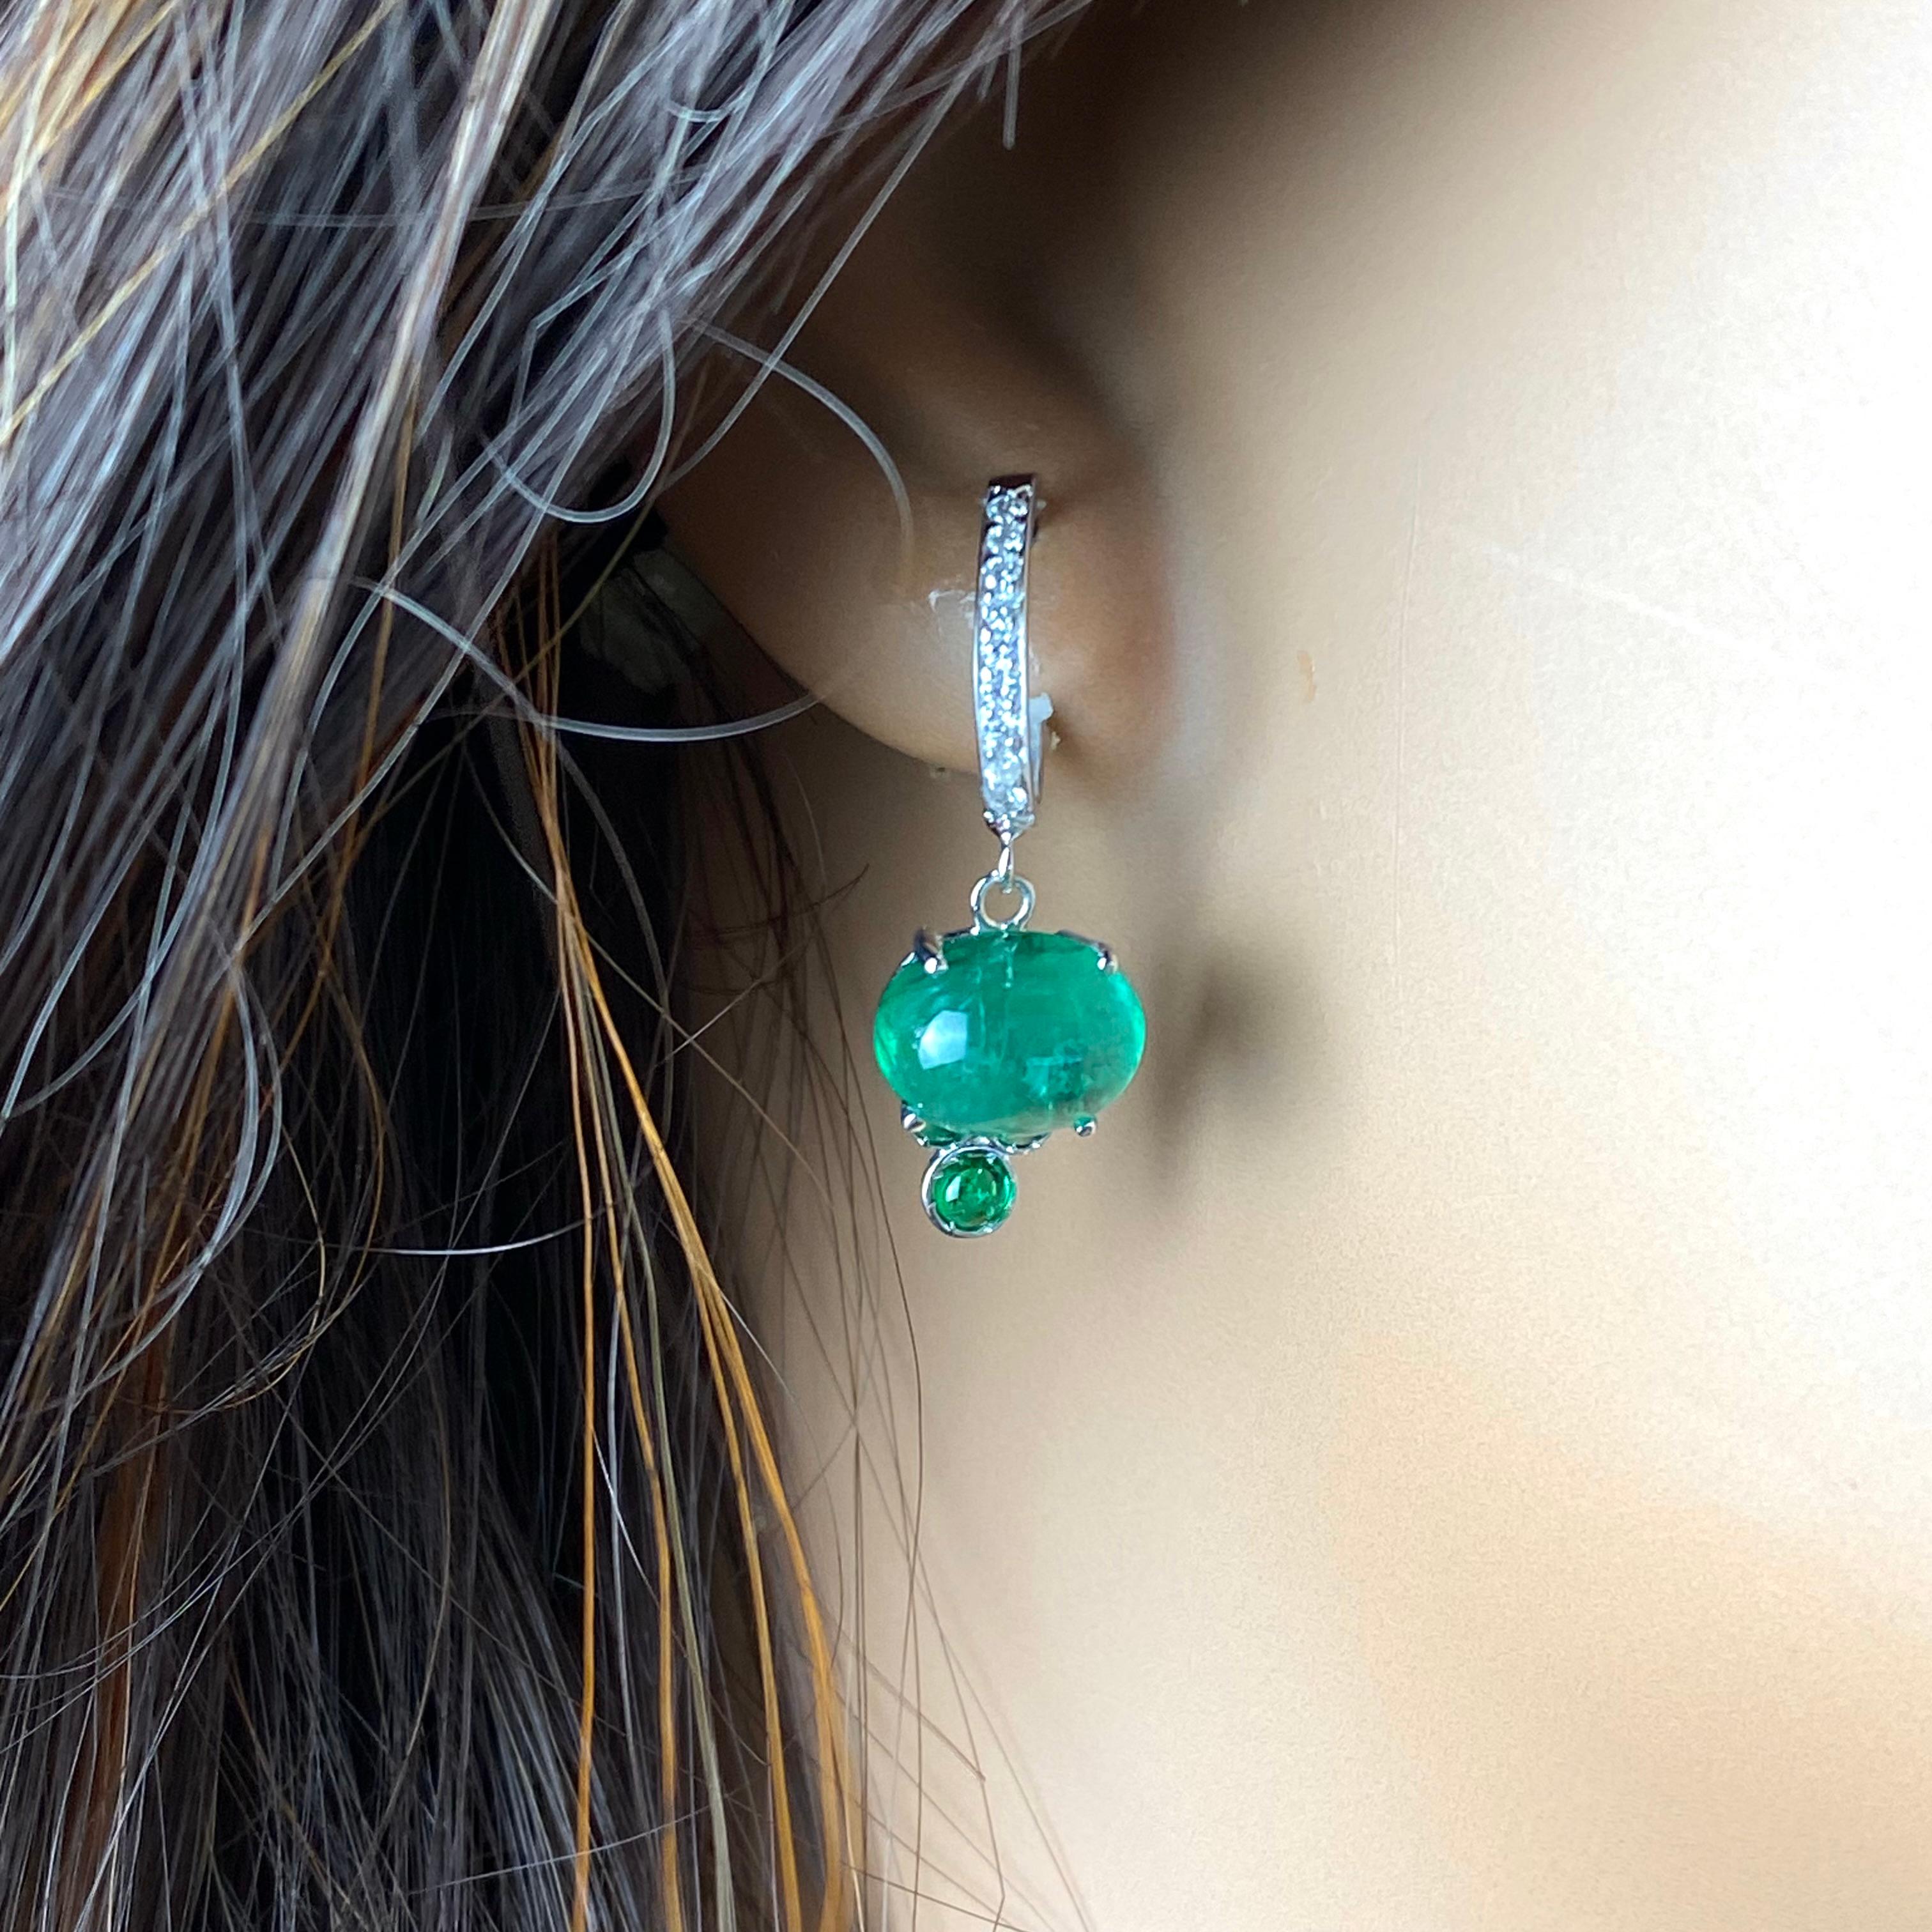 Introducing our exquisite 14 karat white gold hoop drop earrings, adorned with captivating cabochon emeralds and shimmering pave diamonds, perfect for adding a touch of elegance to any ensemble.
Primary Features:
Material: Crafted from high-quality